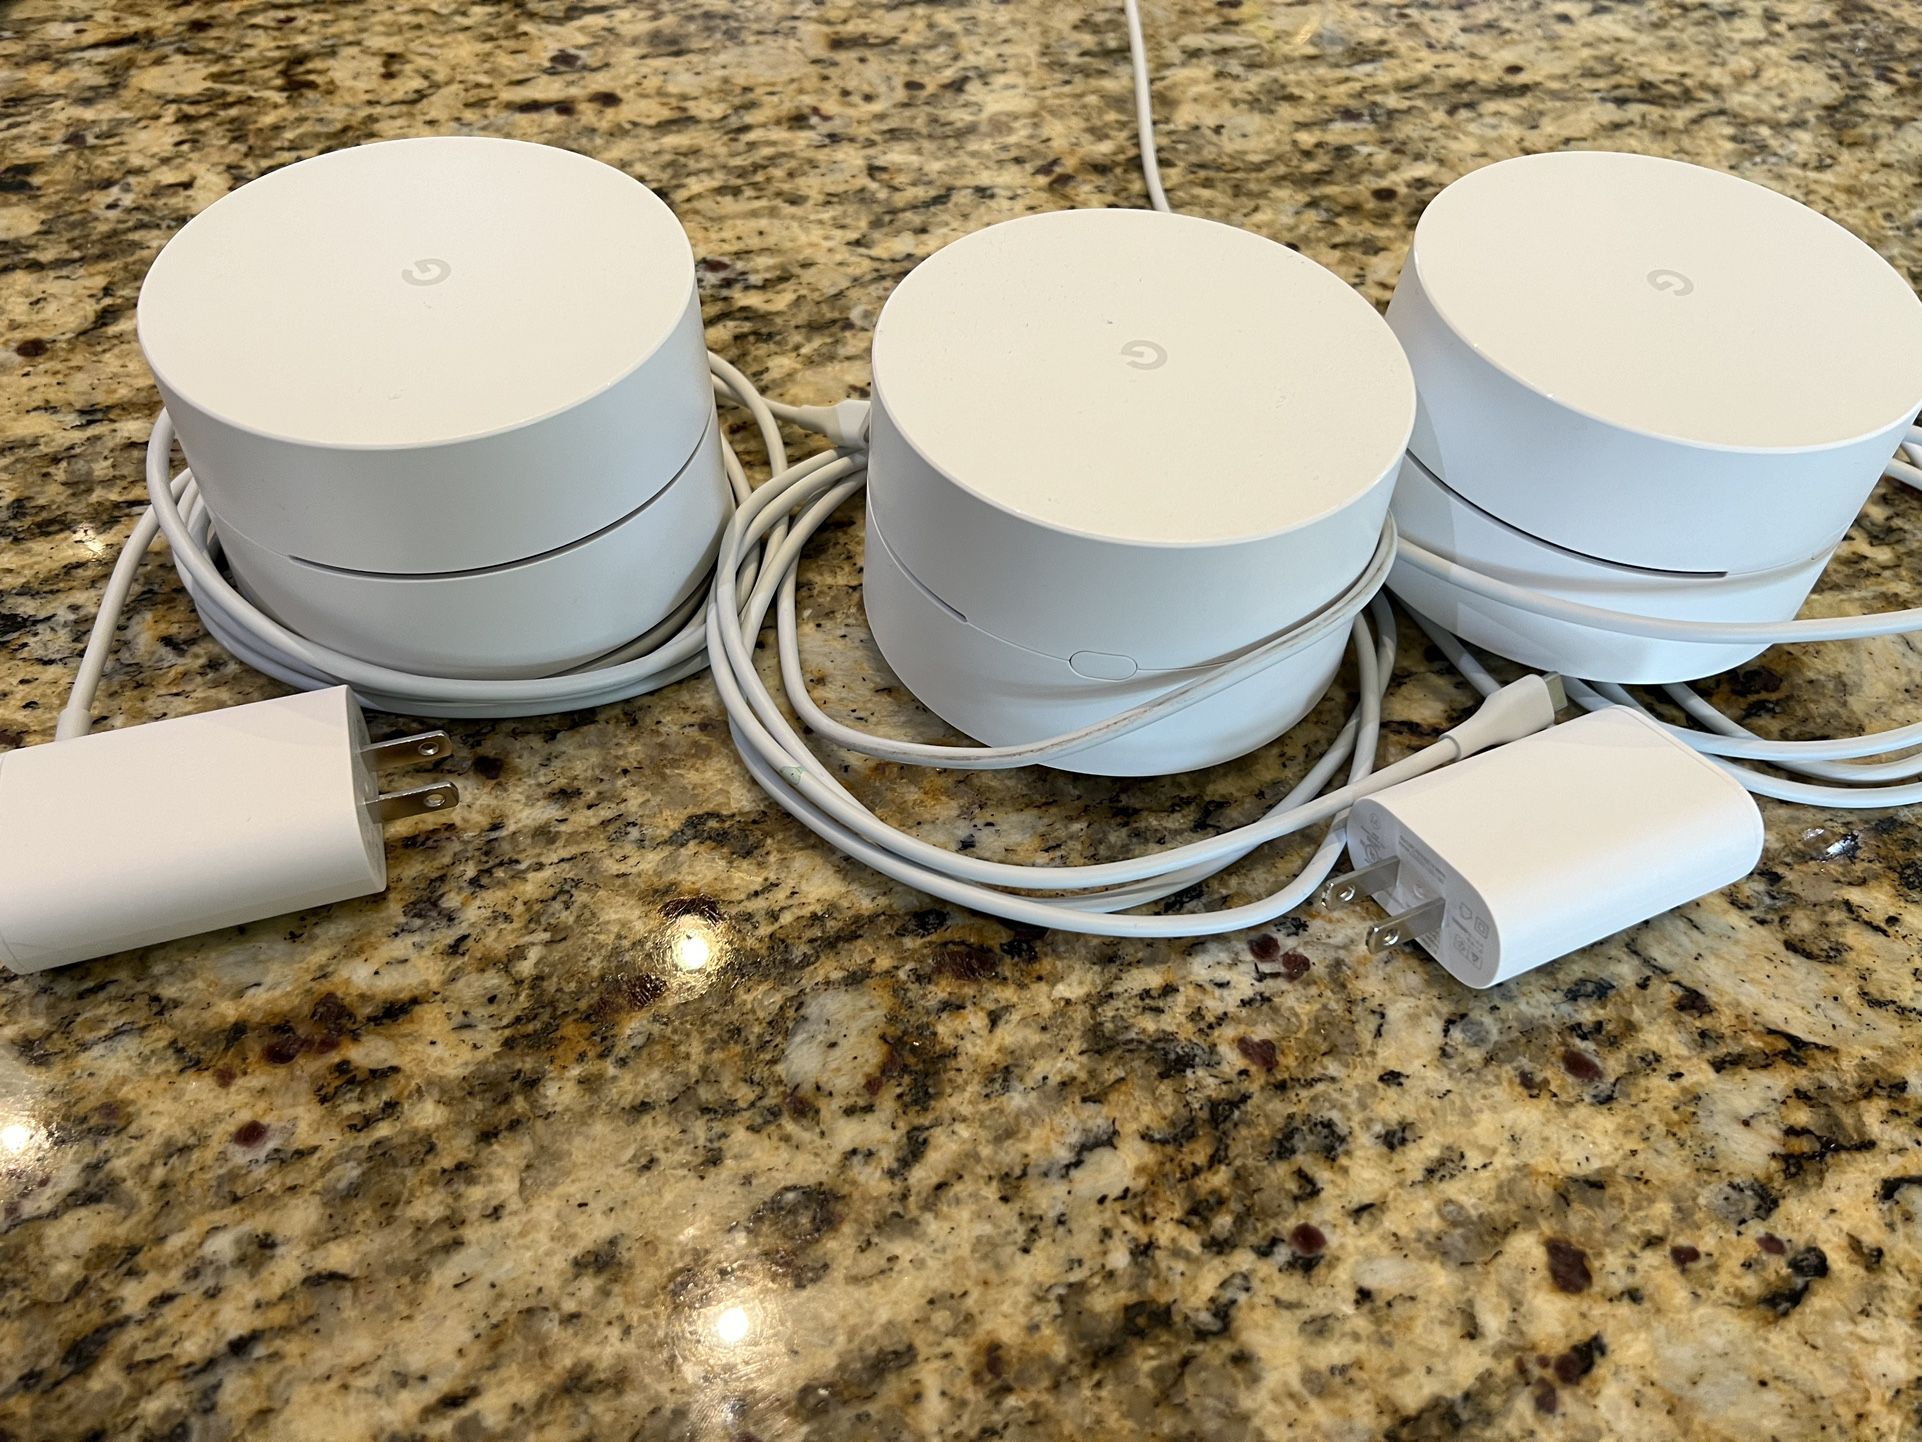 Google WiFi system, 3-Pack - Router Replacement for Whole Home Coverage (NLS-1304-25),White